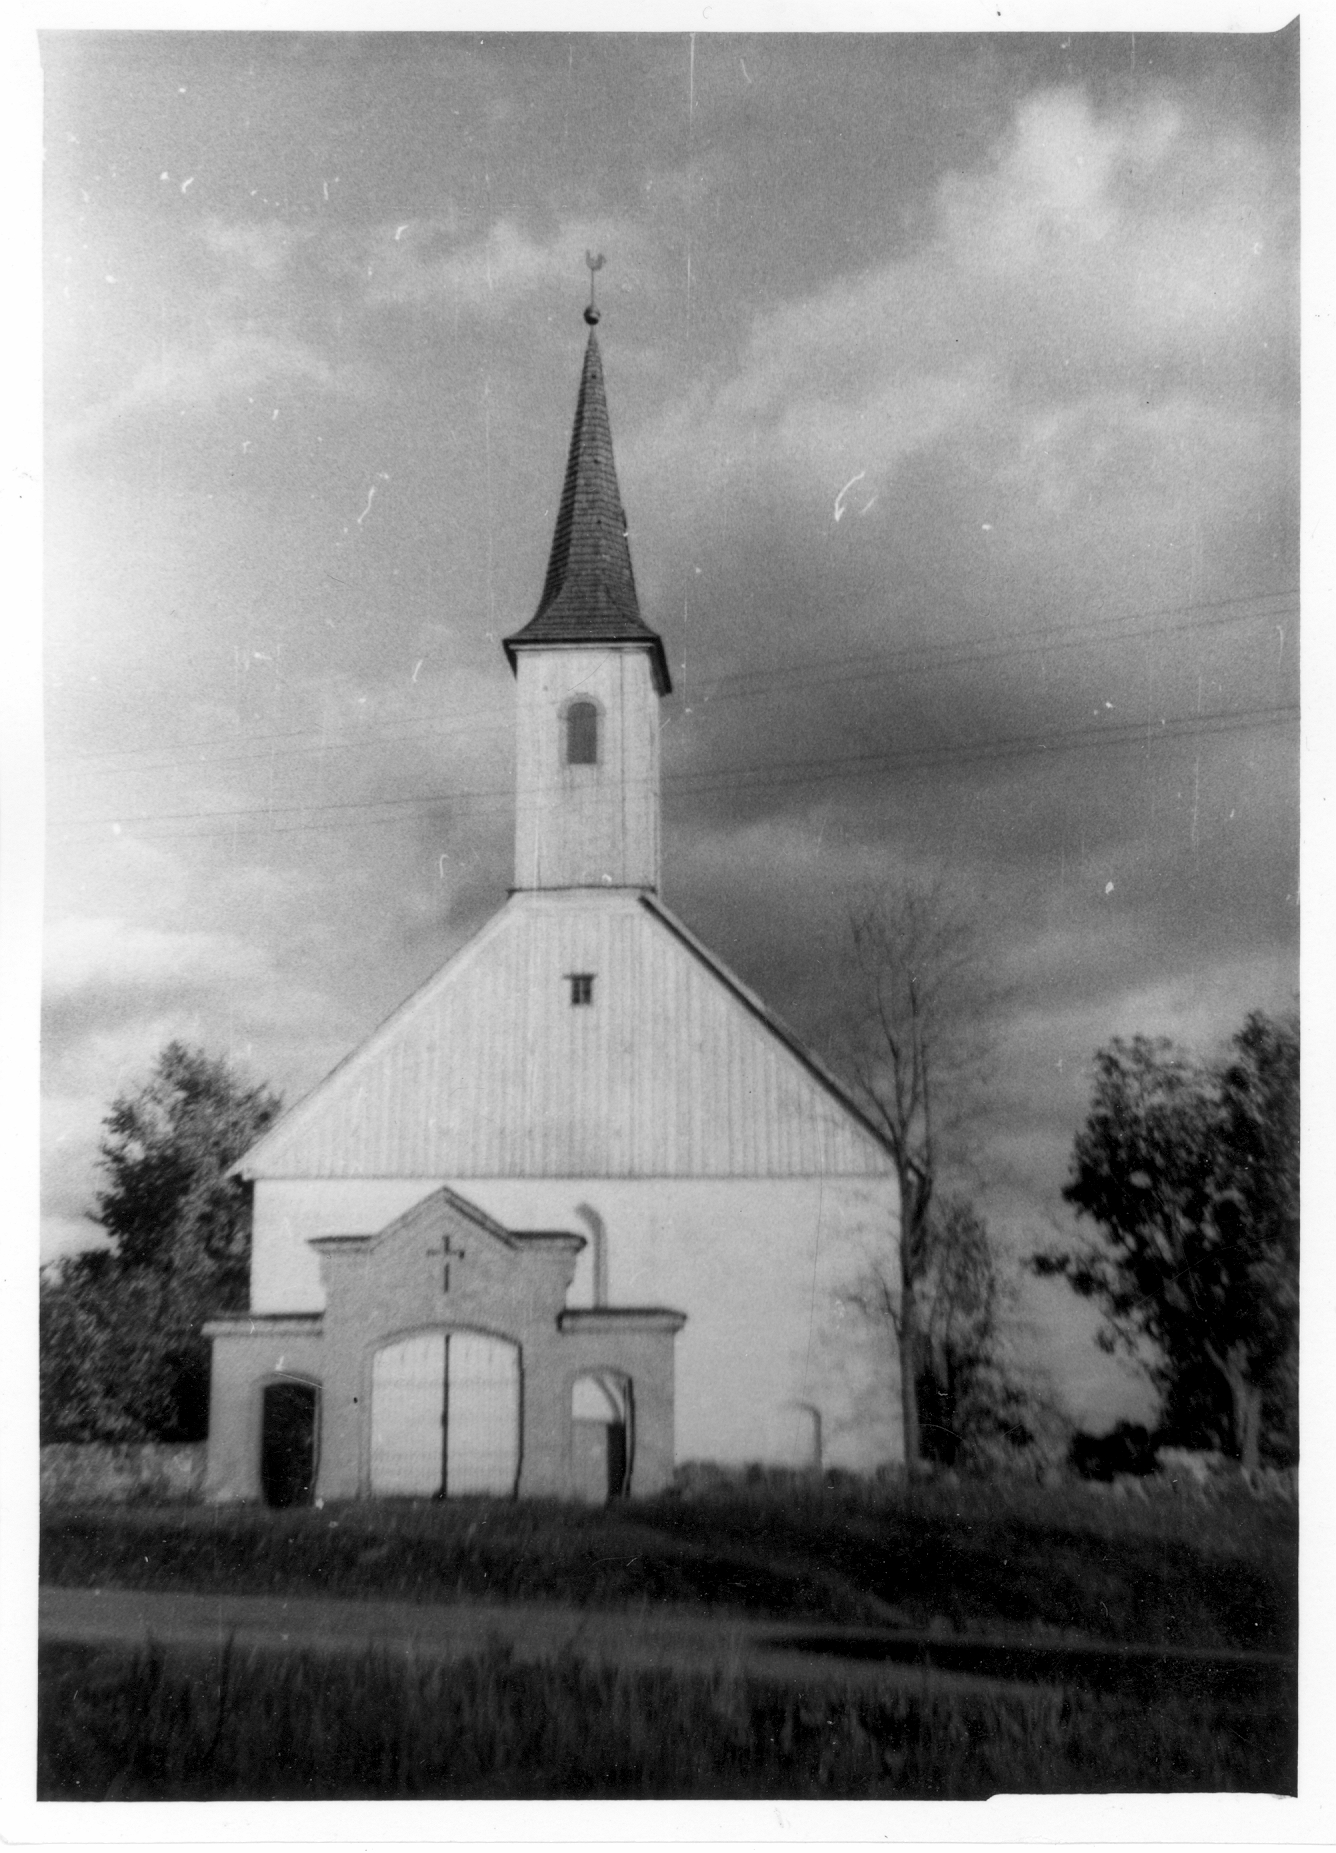 Jakob Tamme-related locations: Rannu Church